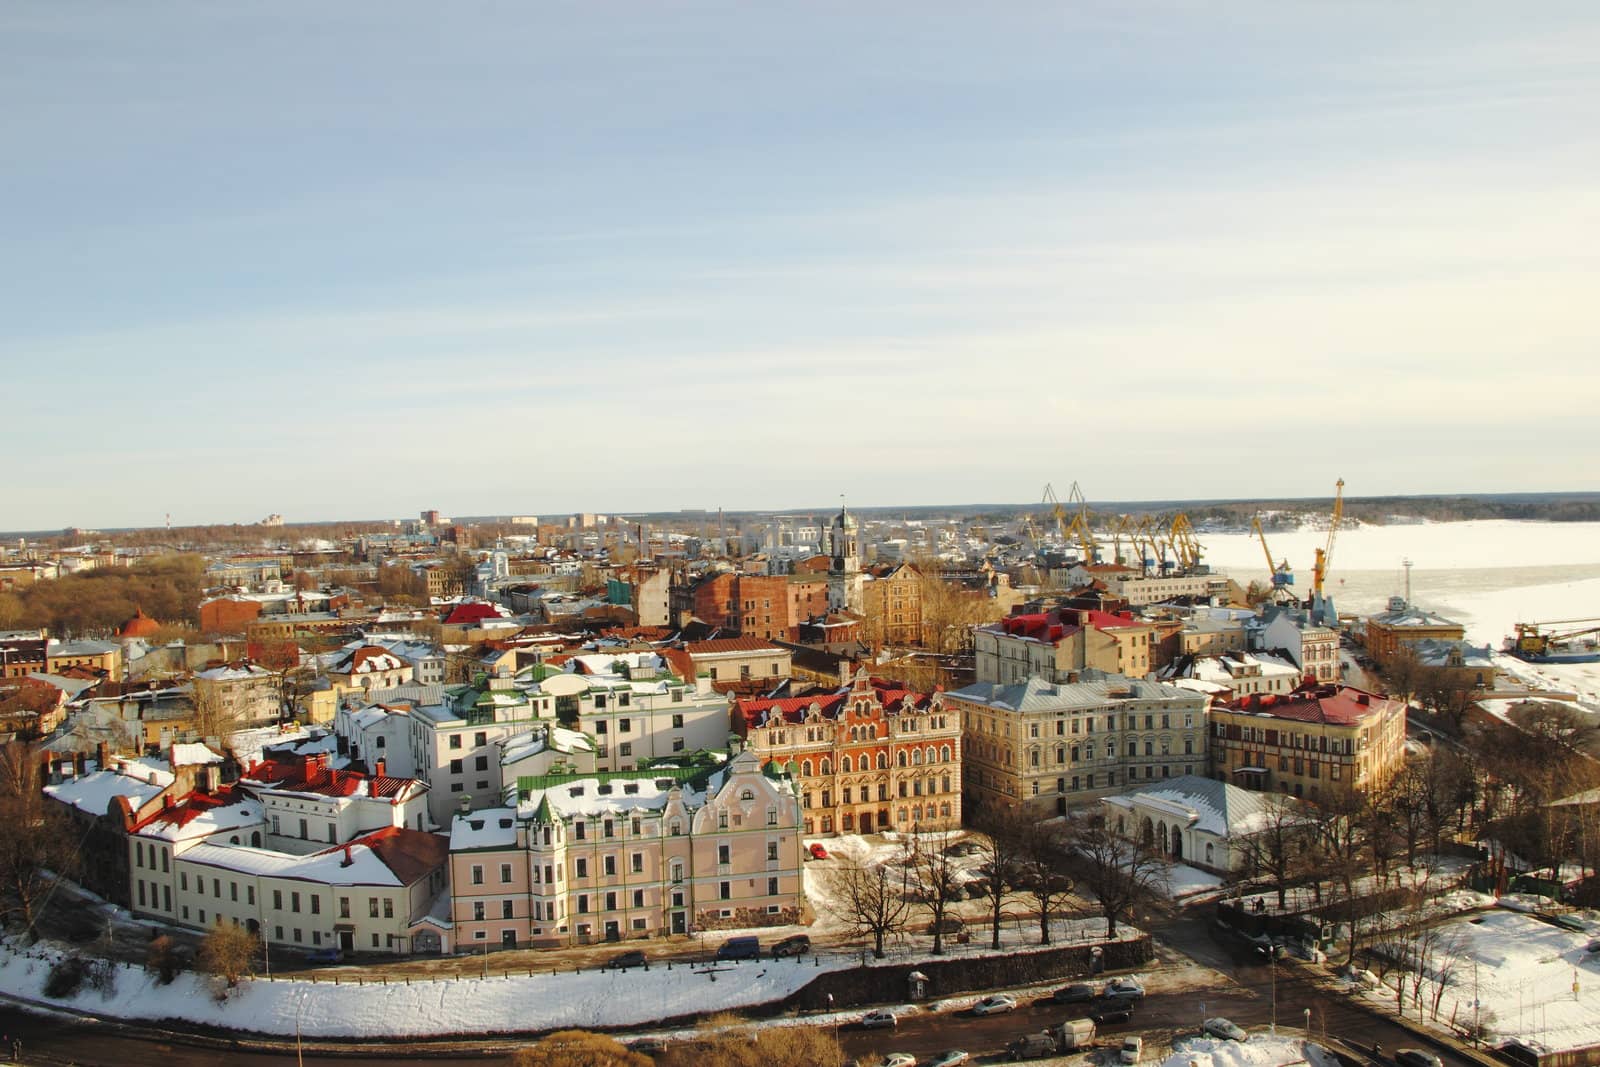 View from the height of the tower Vyborg by Metanna